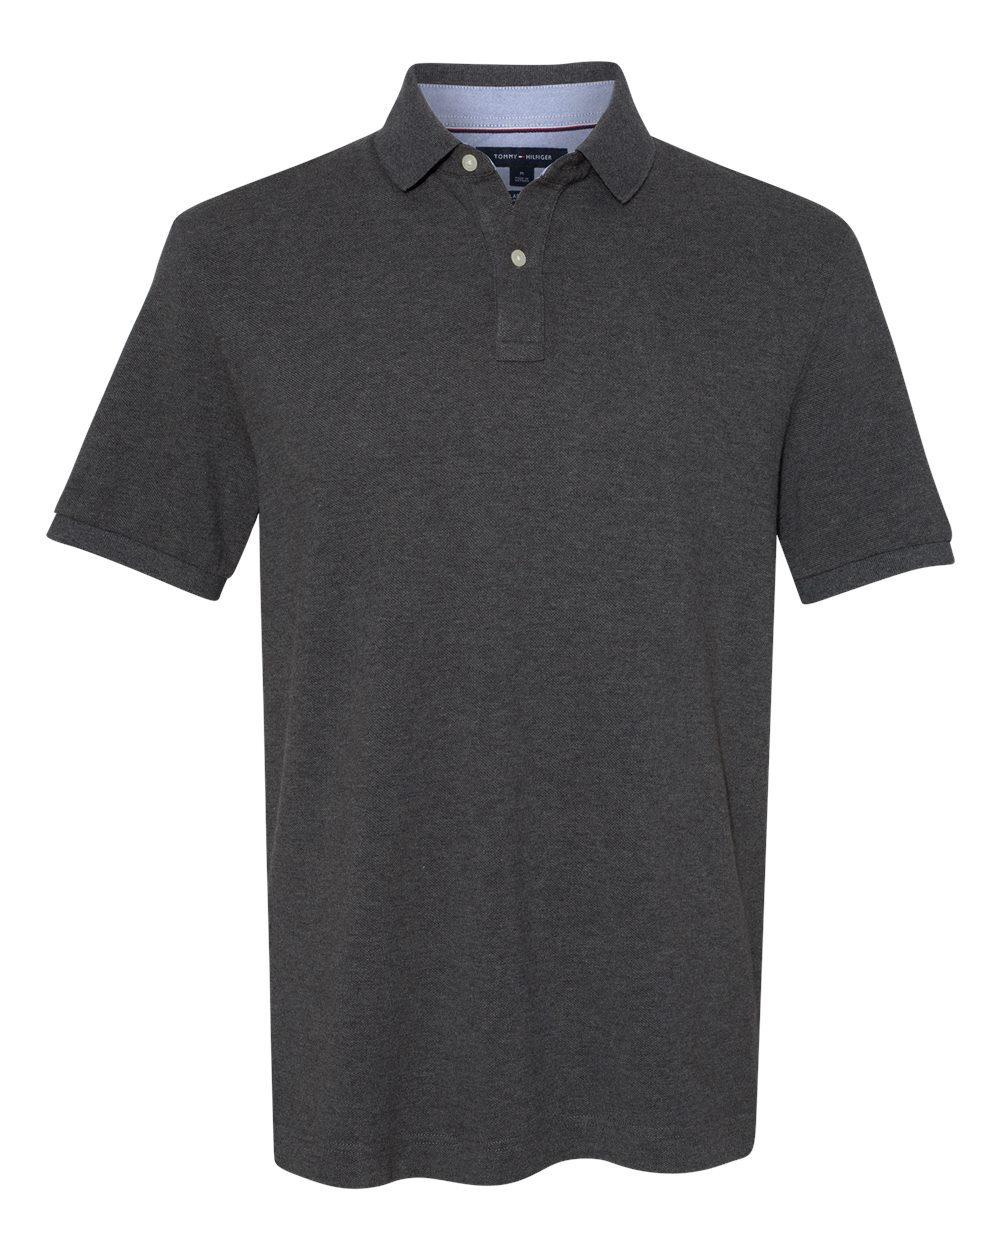 Tommy Hilfiger Classic Fit Ivy Pique Polo #13H1867 Charcoal